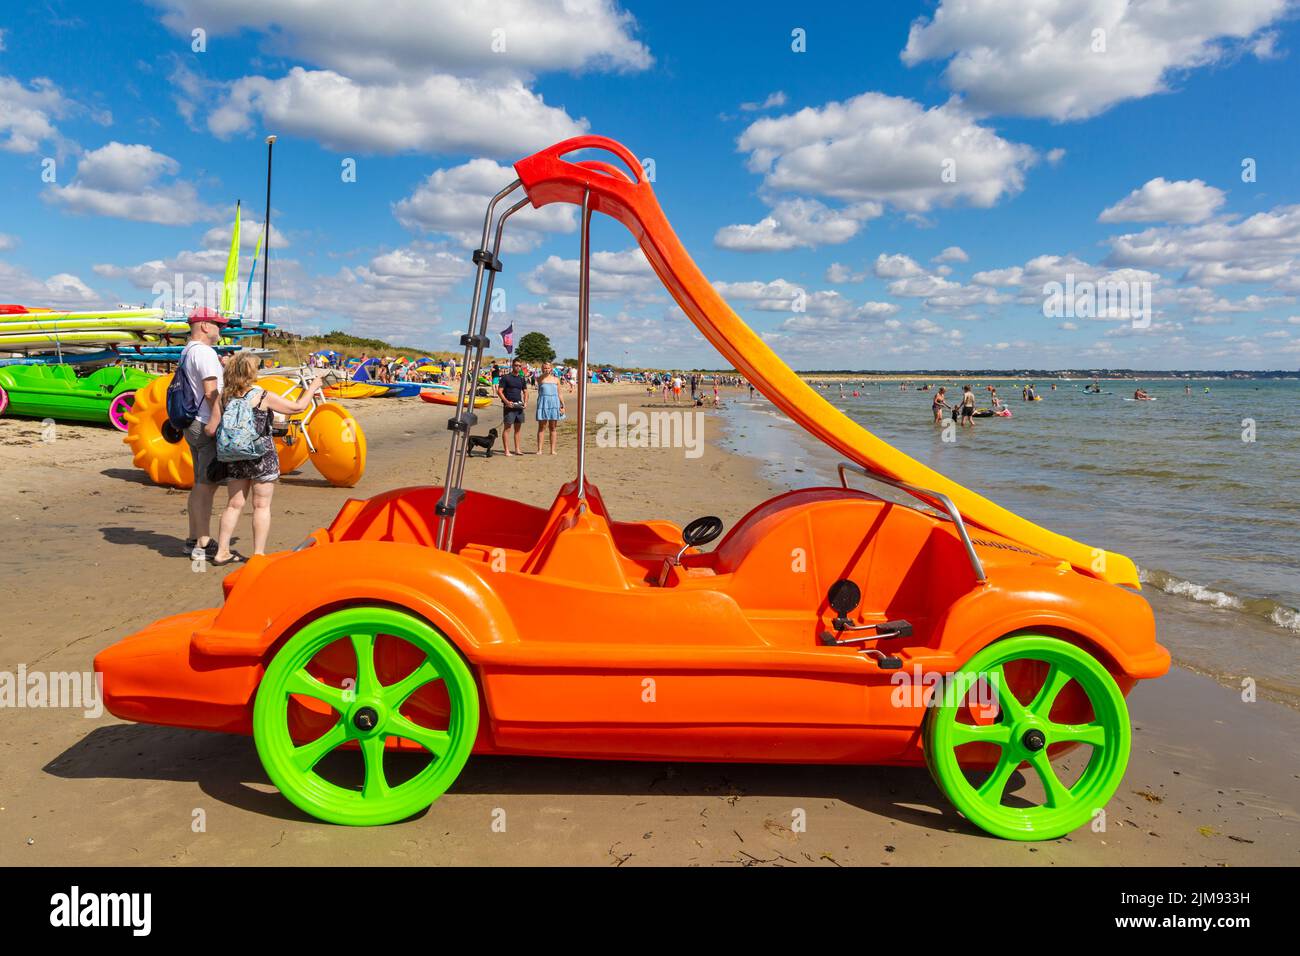 Studland, Dorset UK. 5th August 2022. UK weather: warm and sunny at Knoll beach, Studland beaches as sunseekers head to the seaside to enjoy the sunshine. The new sea cars with slide proves to be a popular attraction. Credit: Carolyn Jenkins/Alamy Live News Stock Photo